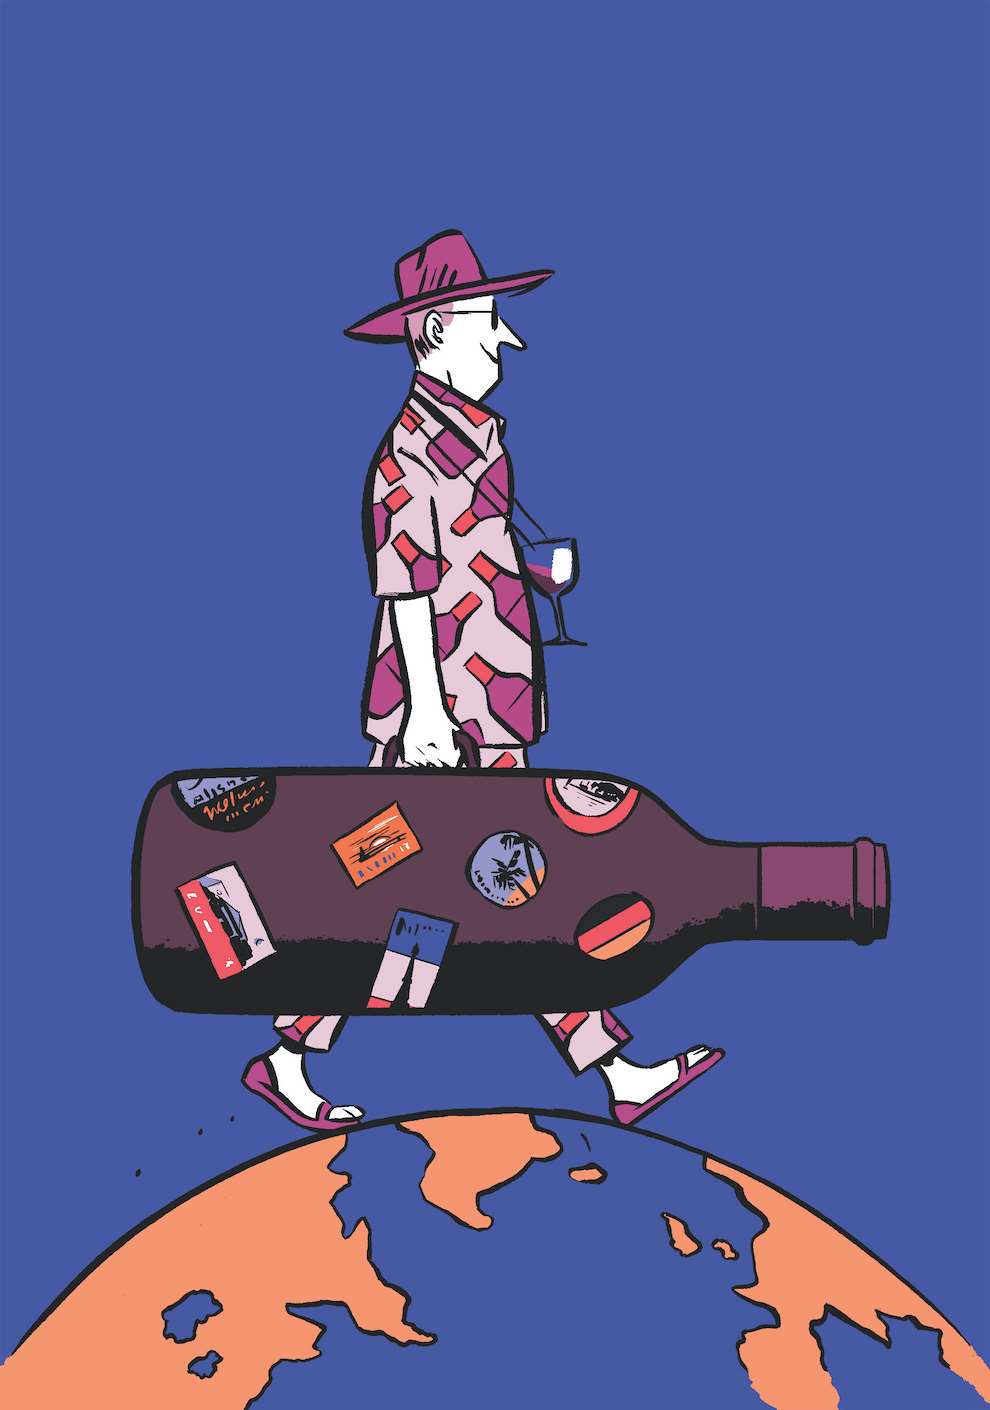 Nishant Choksi, Playful editorial illustration of a wine connoisseur standing on the globe carrying a wine bottle. Adventure, travel.  